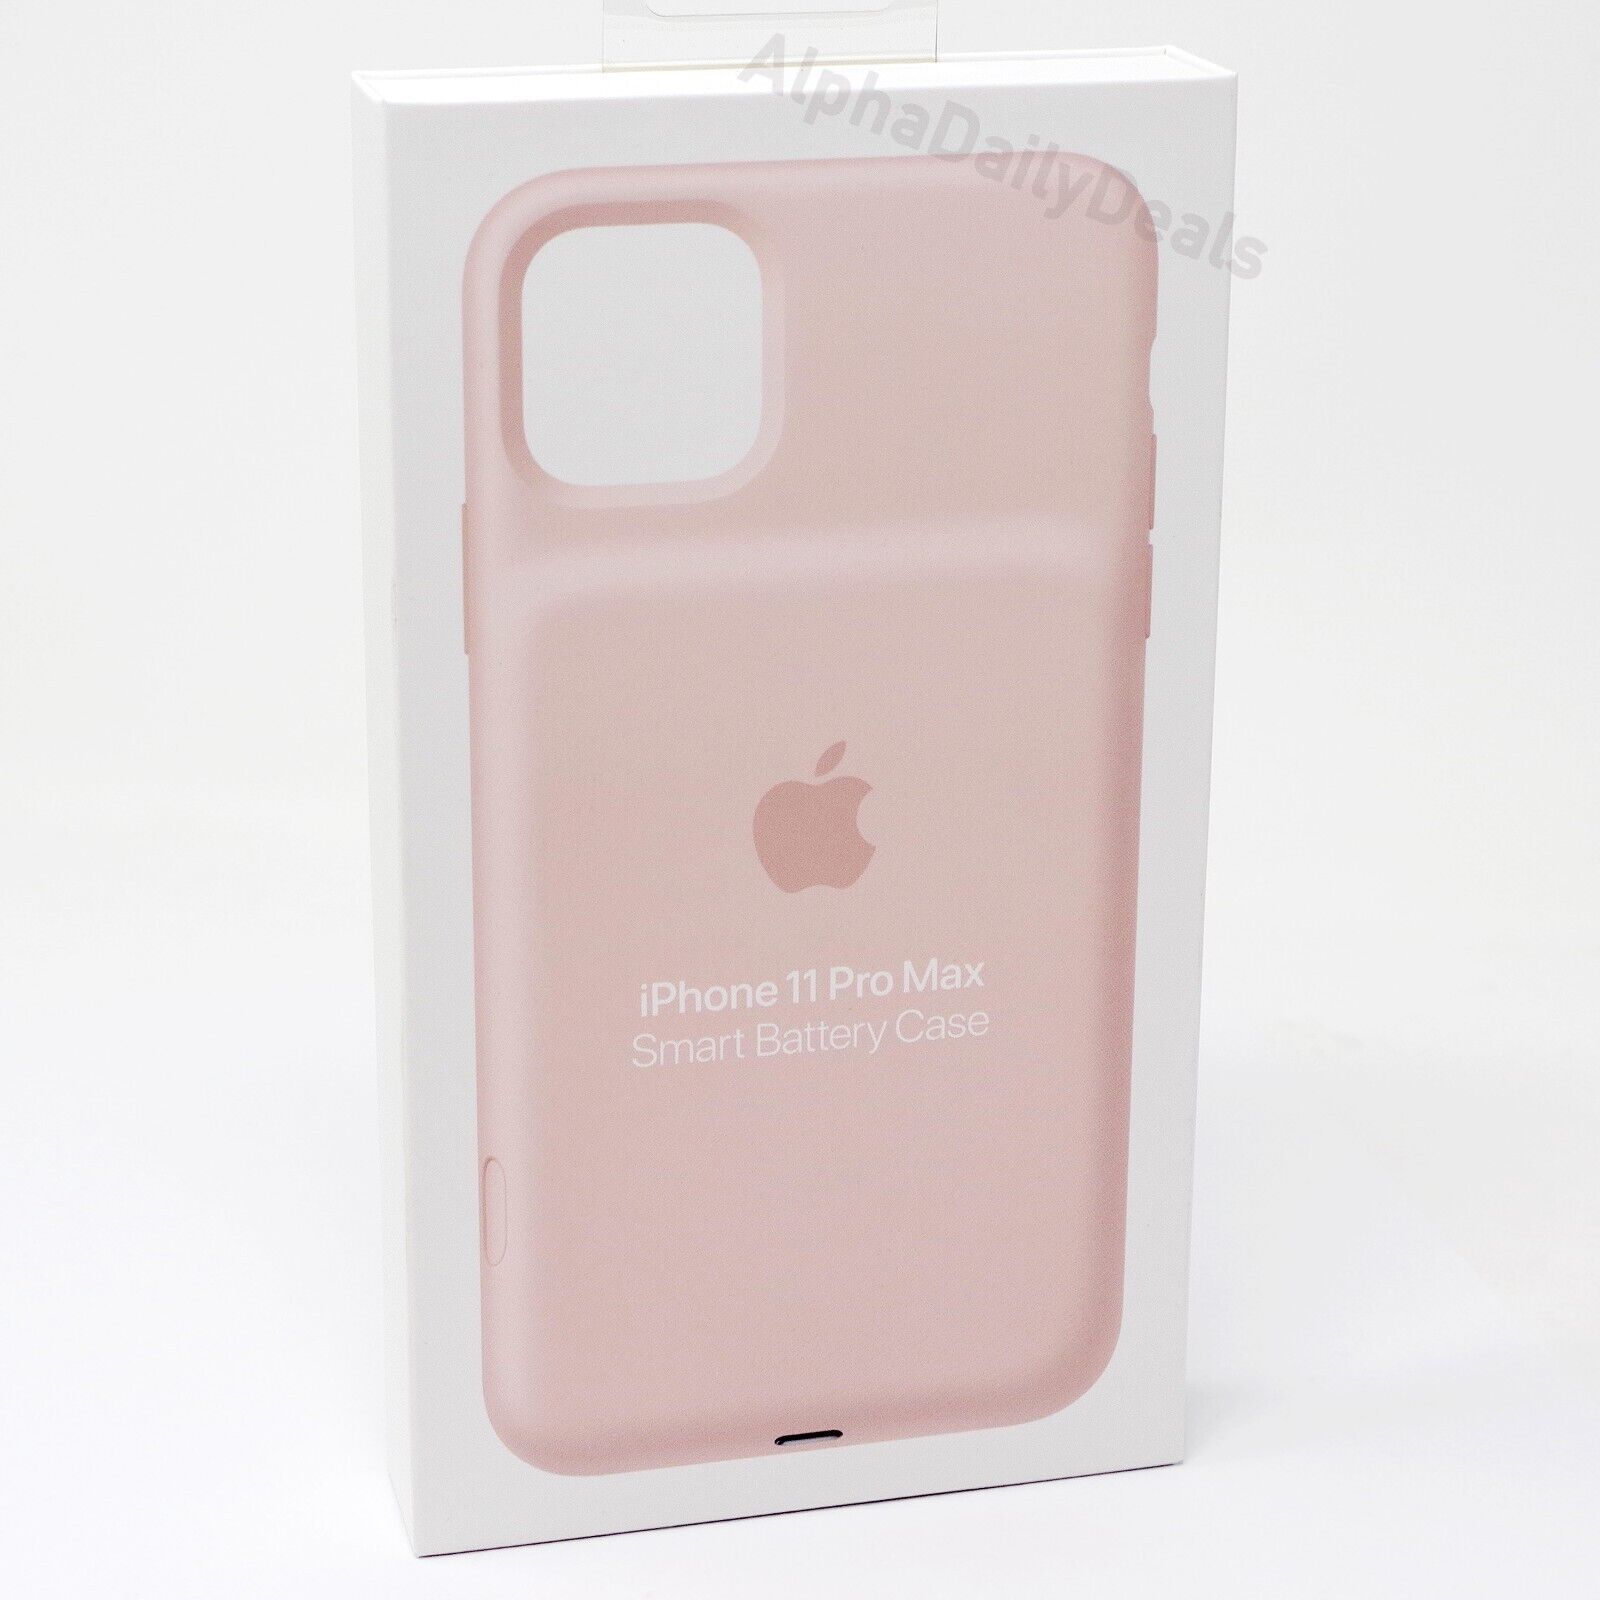 Genuine Apple iPhone 11 PRO MAX Smart Battery Case Pink Sand NEW SEALED